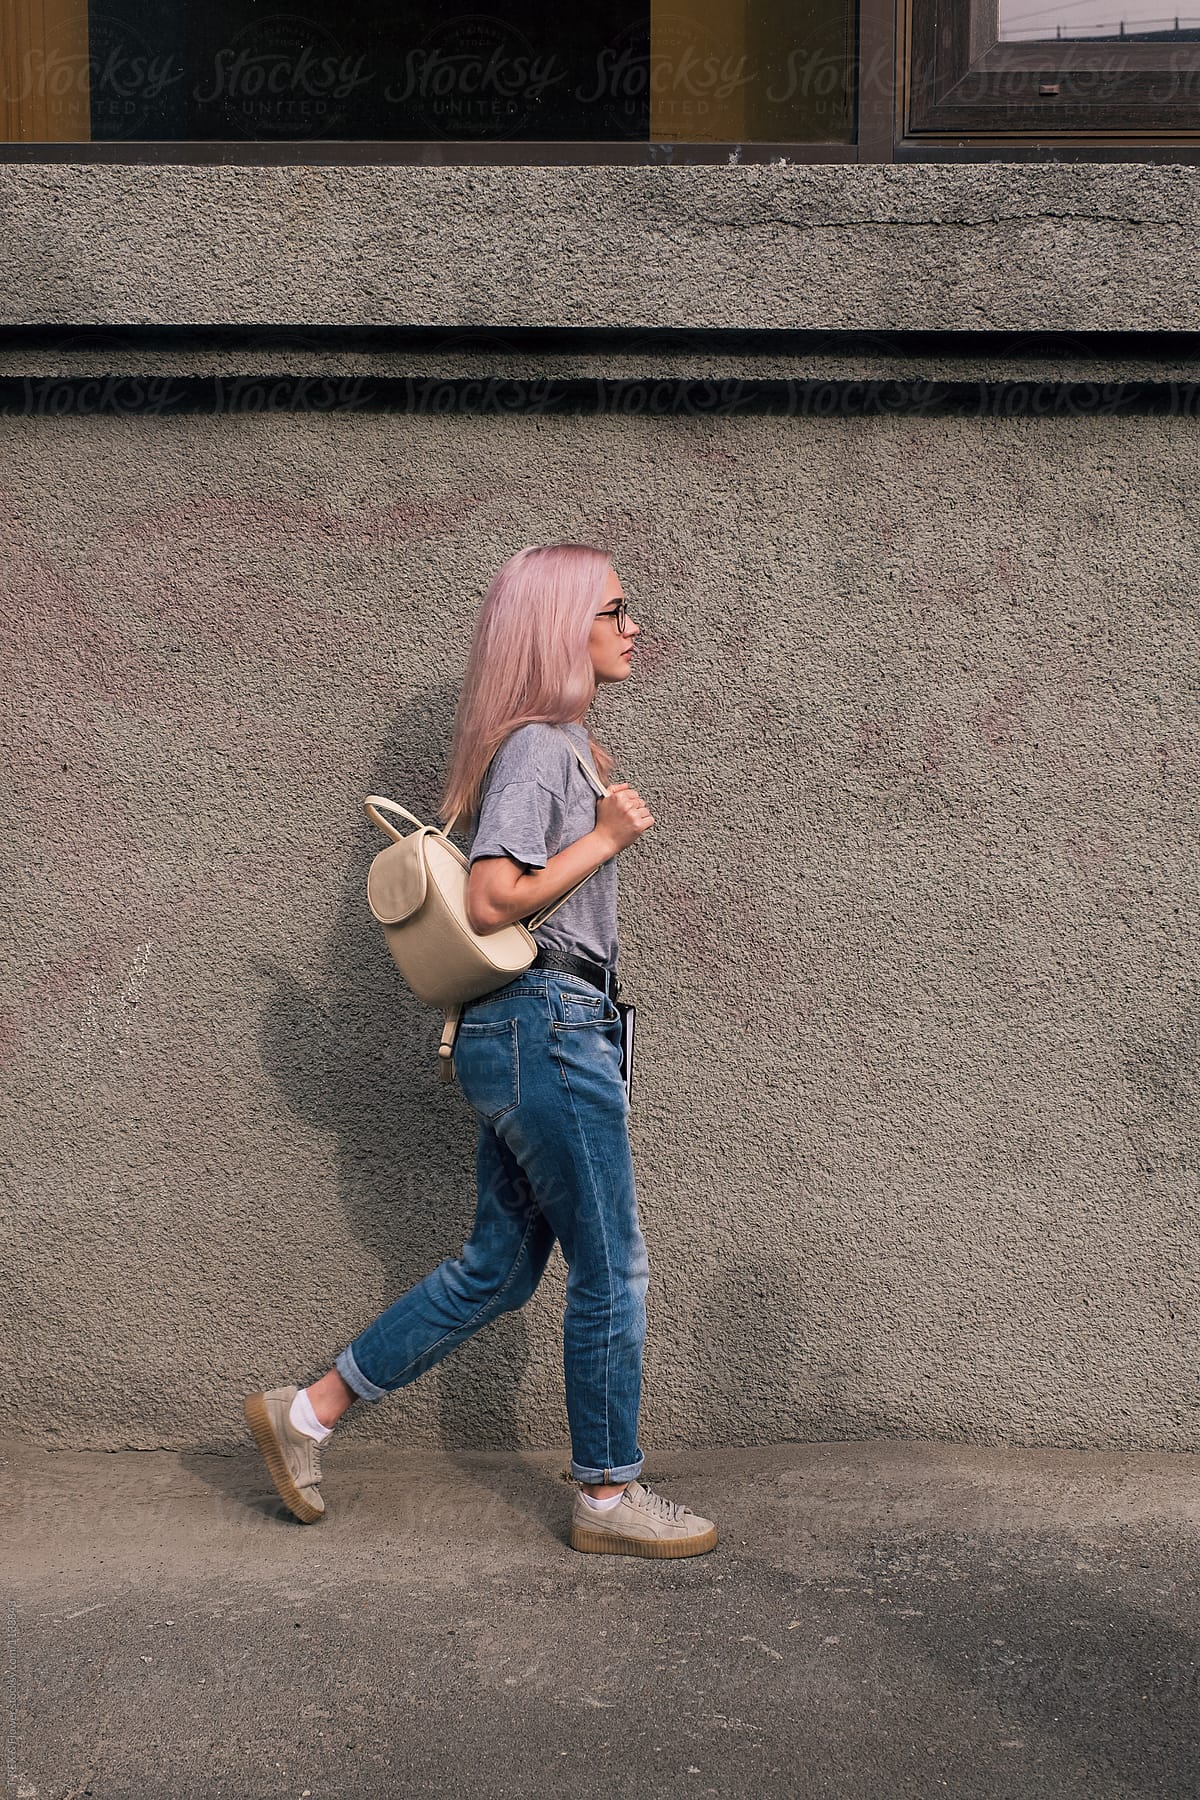 Walking Pink Haired Woman In Glasses With Rucksack By Stocksy